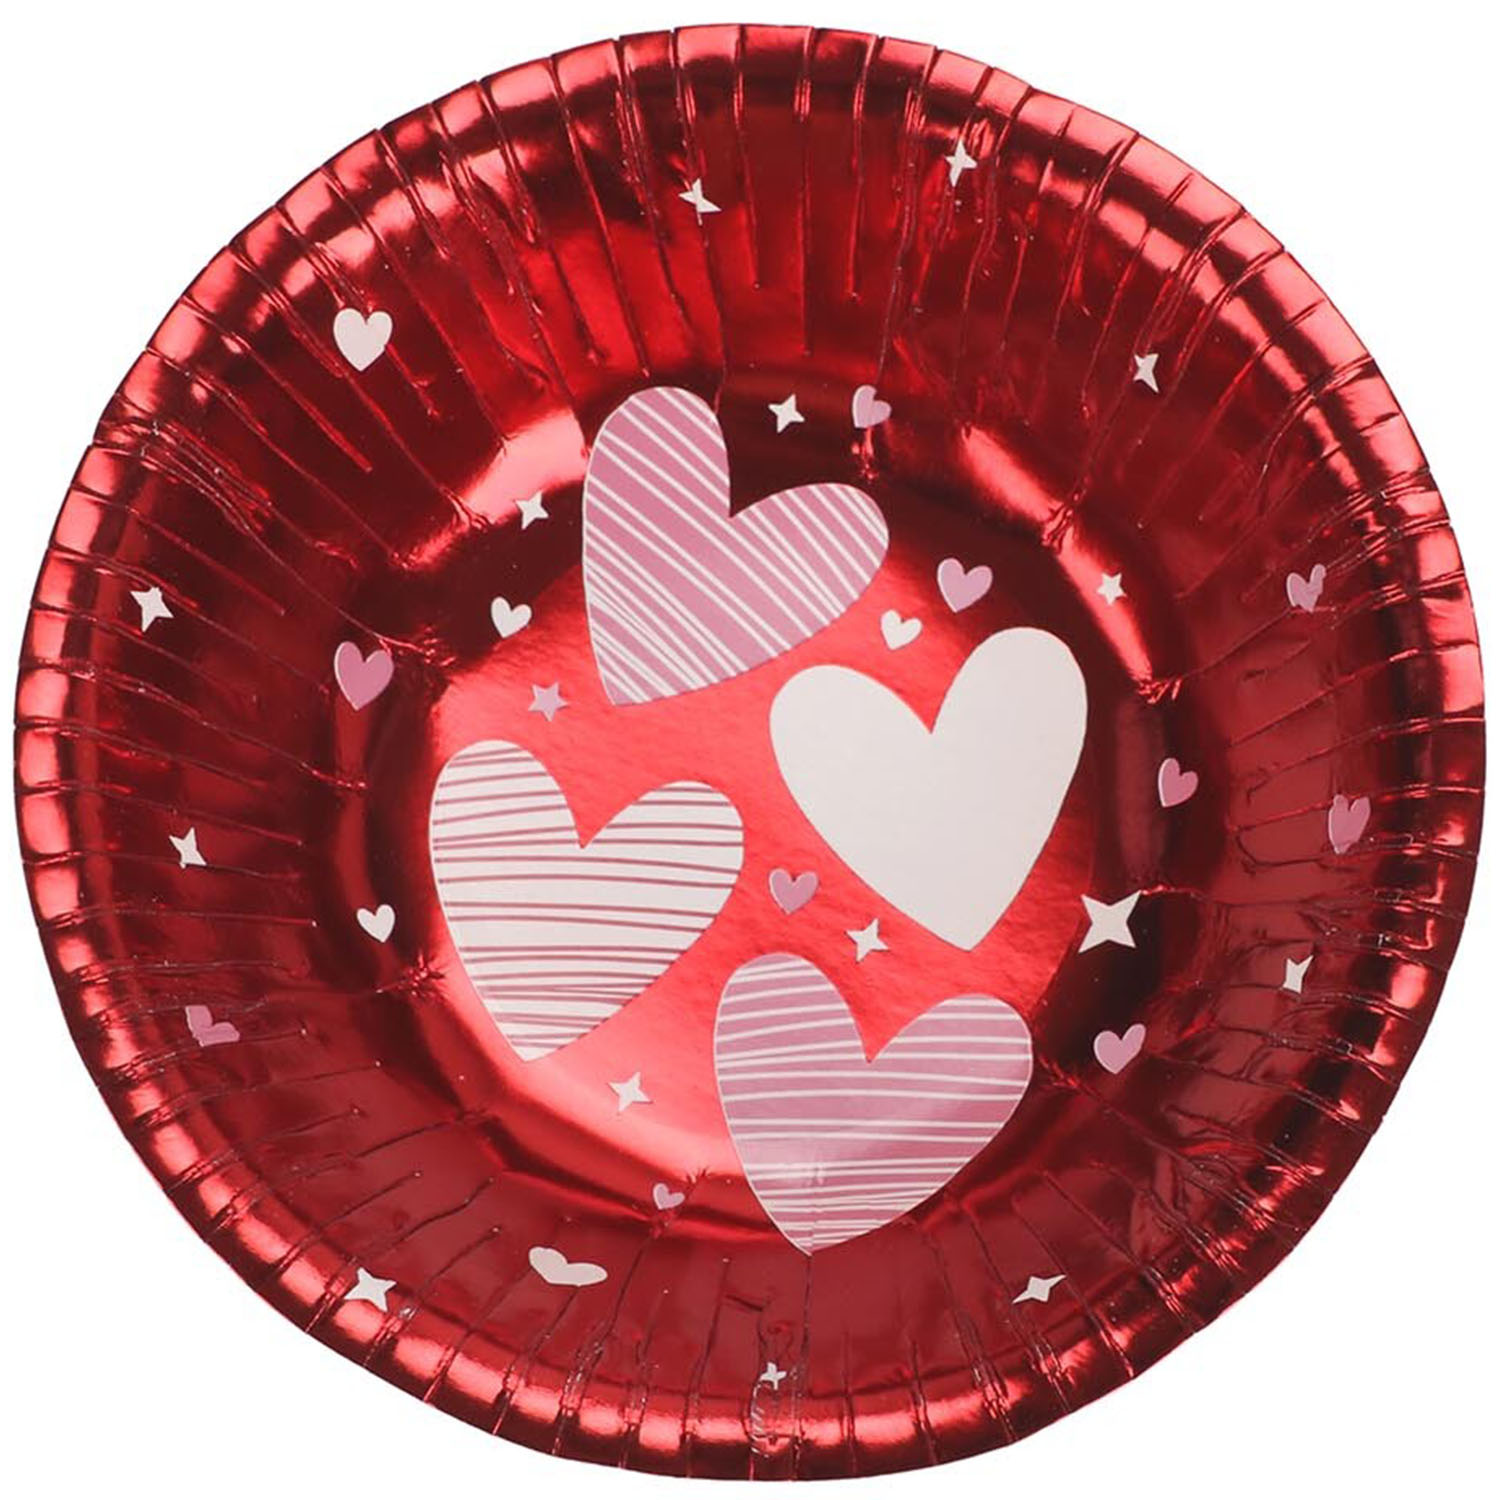 Pack of 8 Heart Bowls - Red Image 2